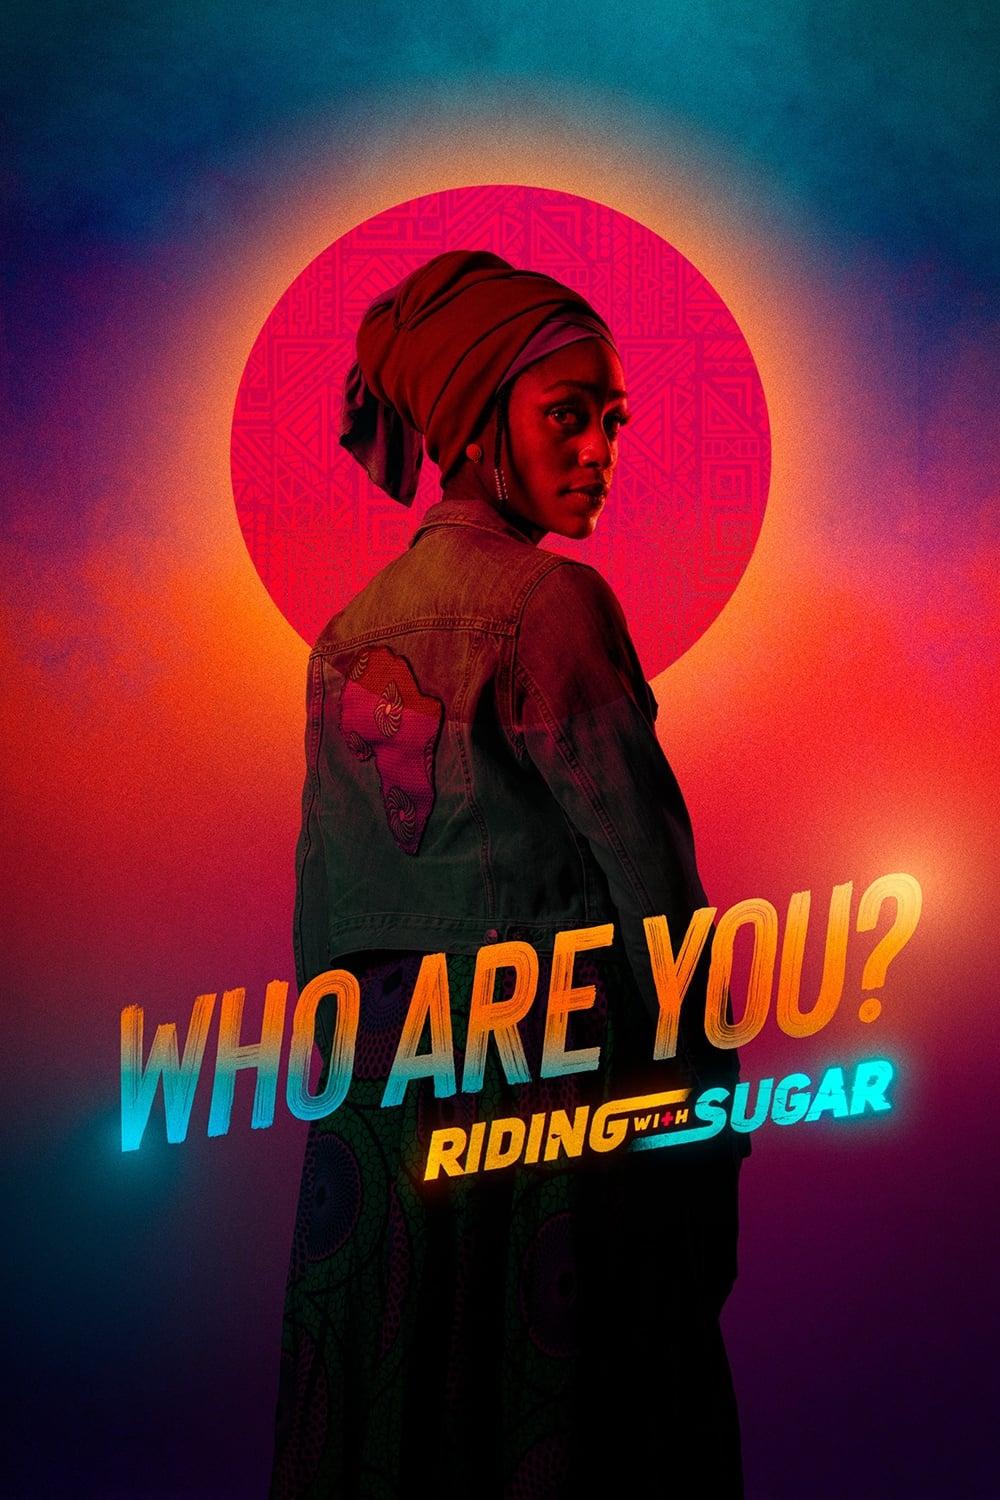 Riding with Sugar poster